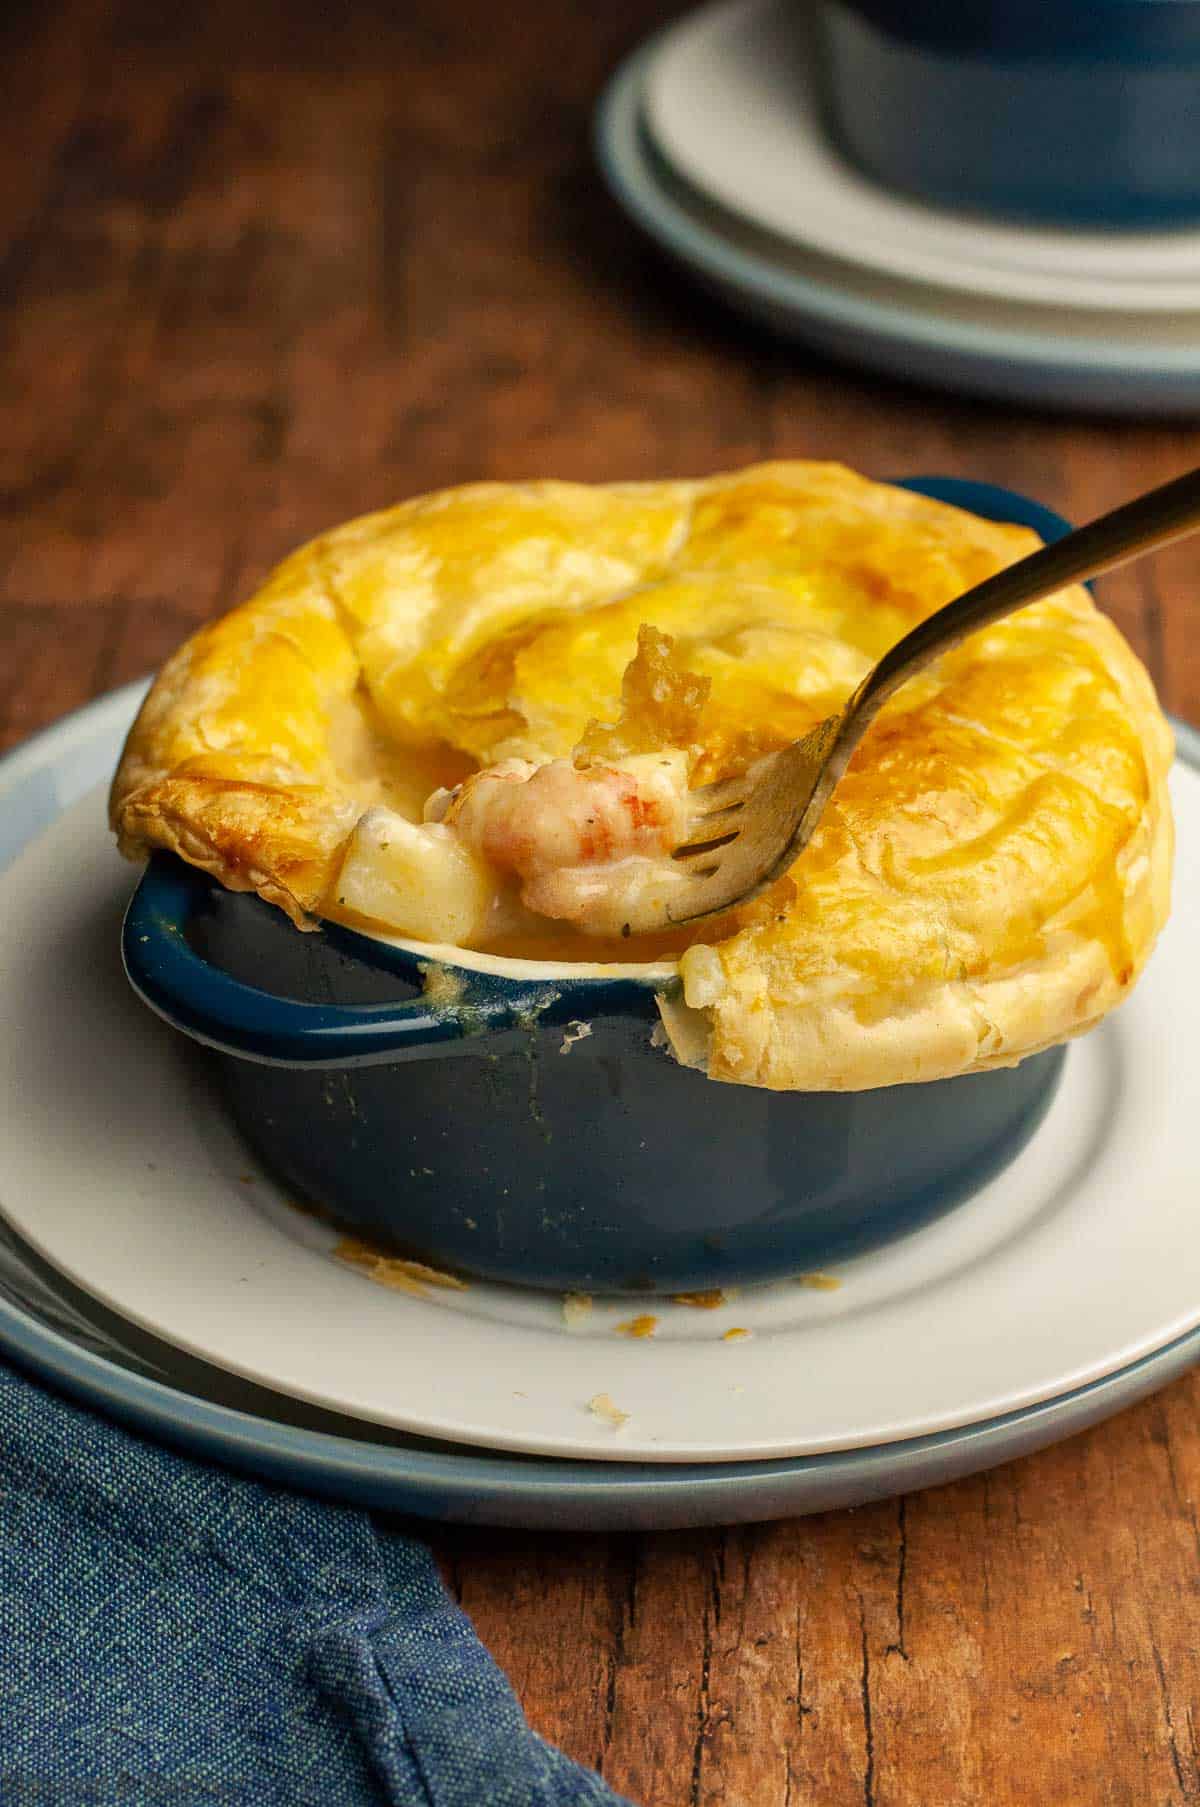 Seafood pot pie with puff pastry showing the seafood filling